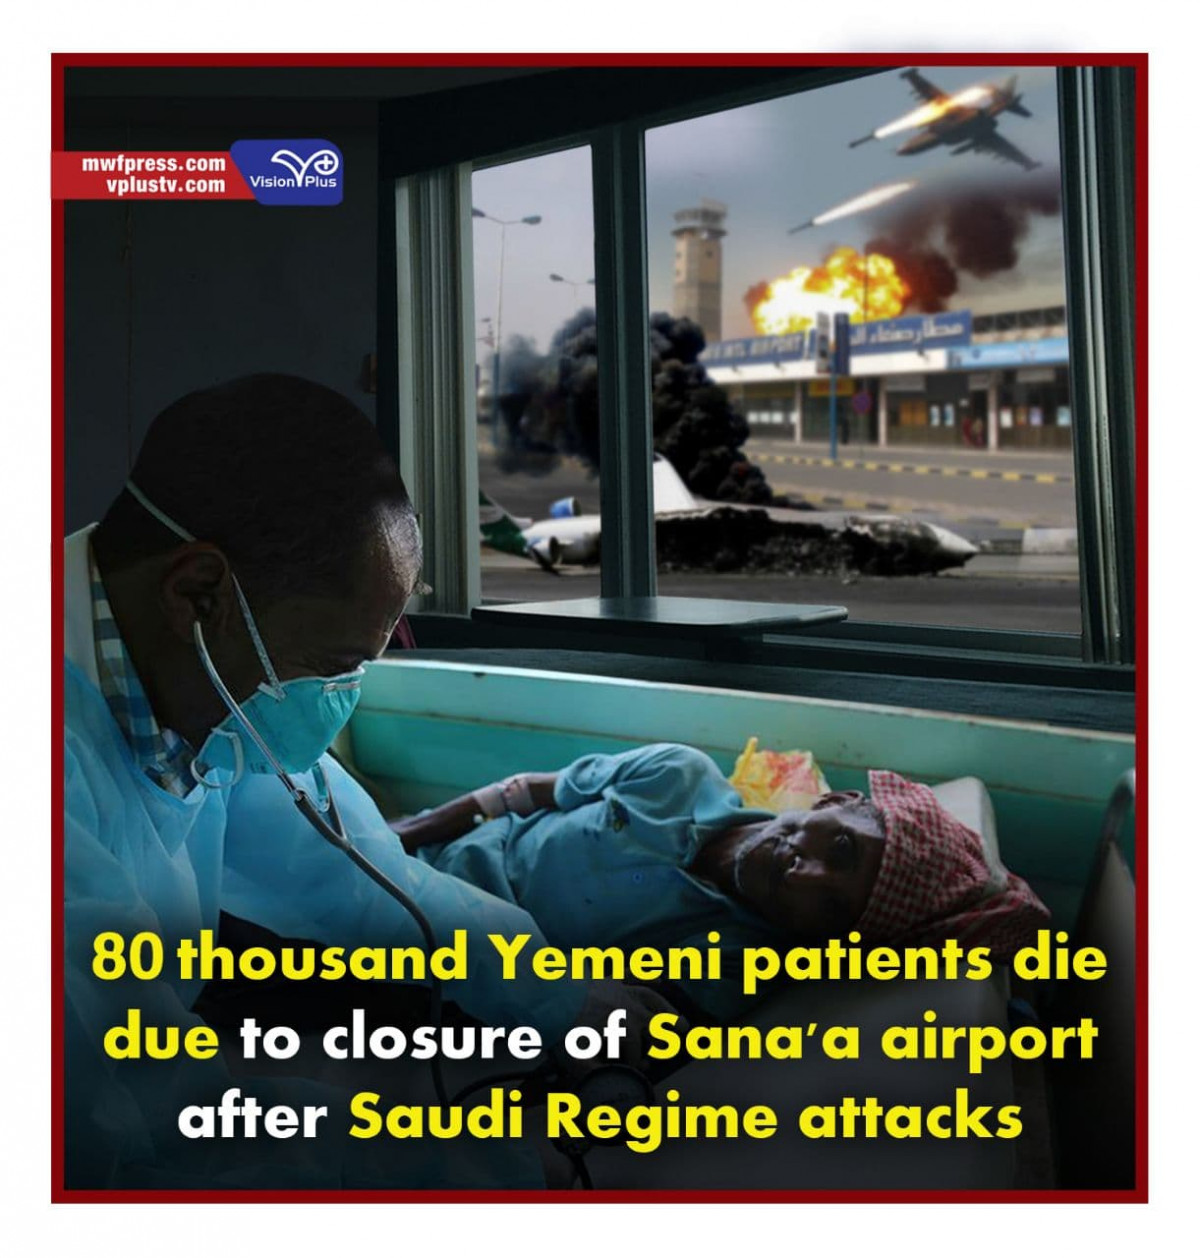 80 thousand Yemeni patients die due to closure of Sana'a airport after Saudi Regime attacks